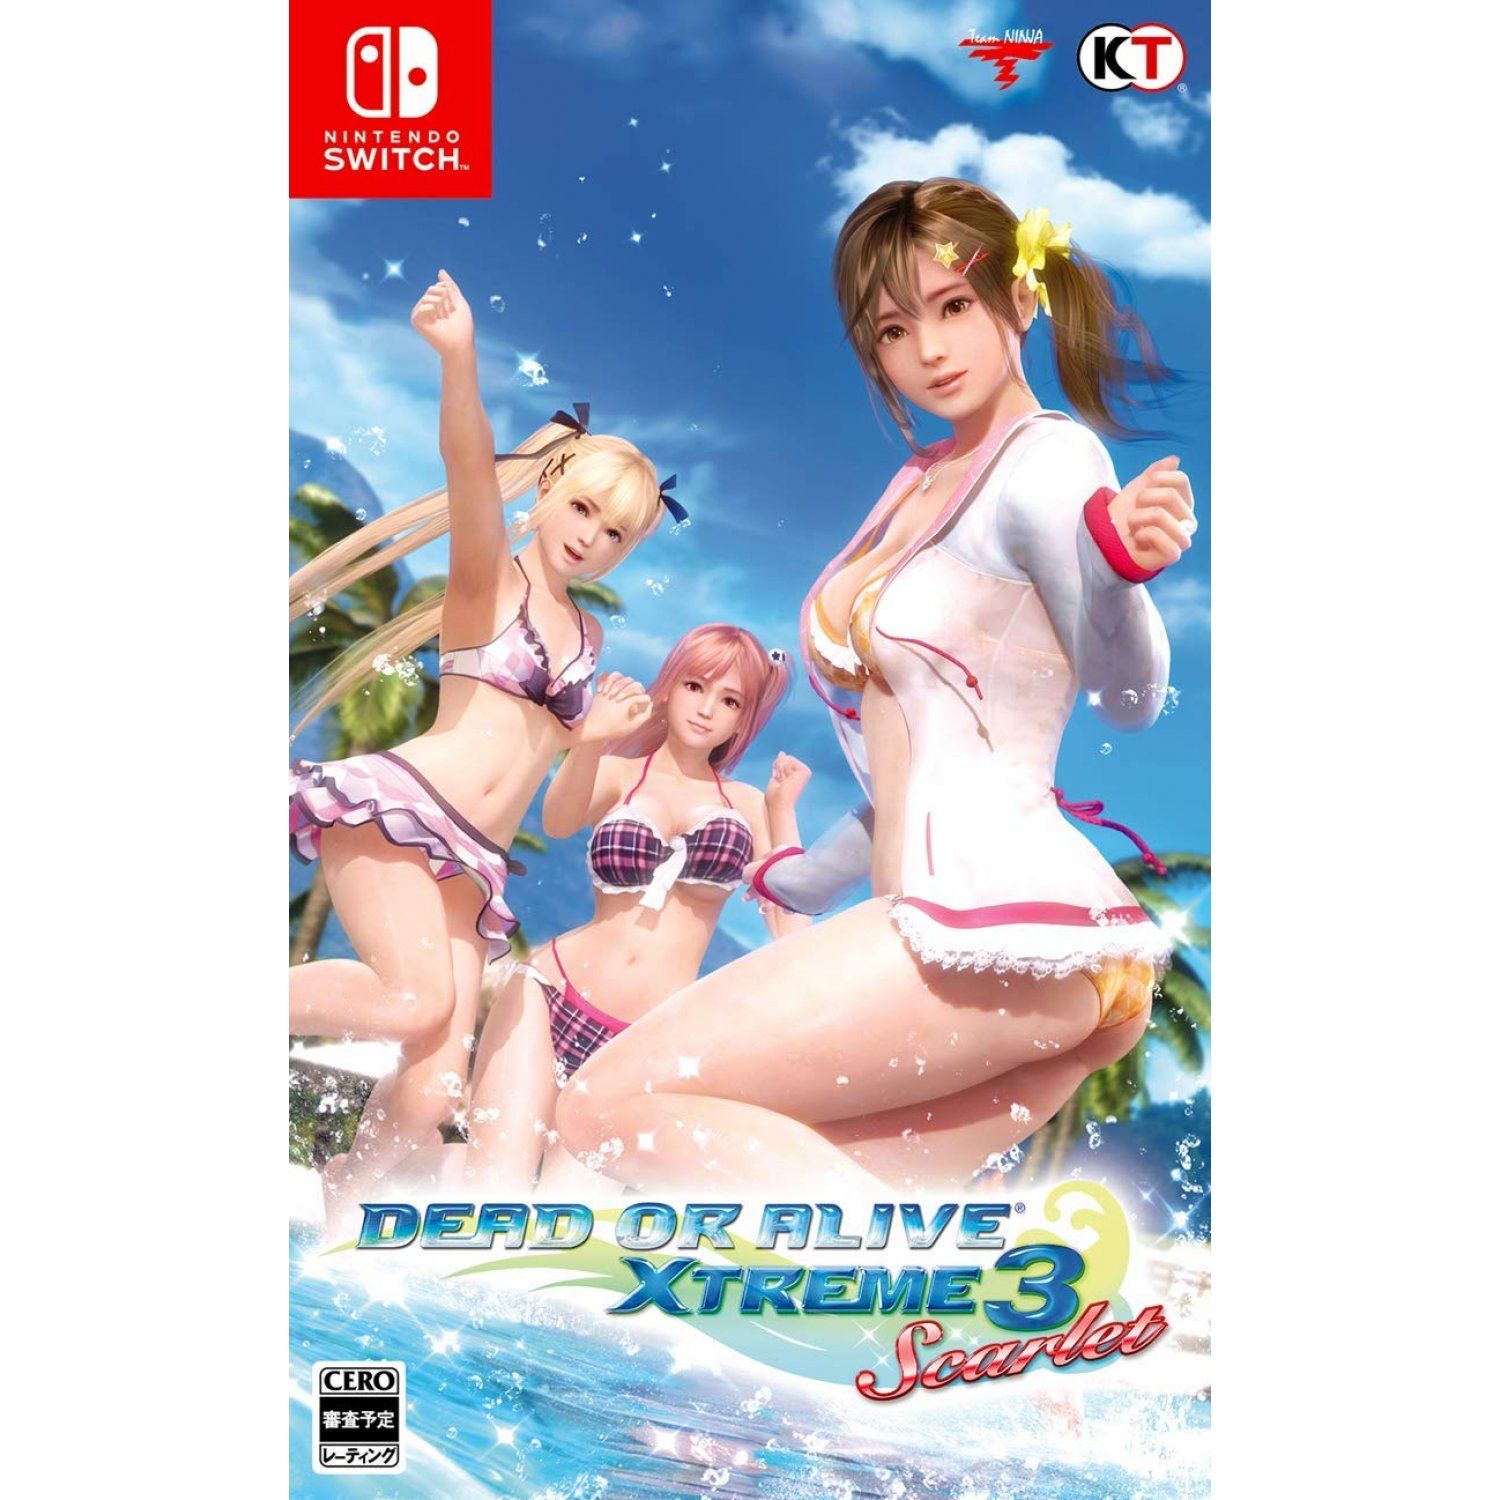  SW089A - Dead Or Alive Xtreme 3: Scarlet cho Nintendo Switch 